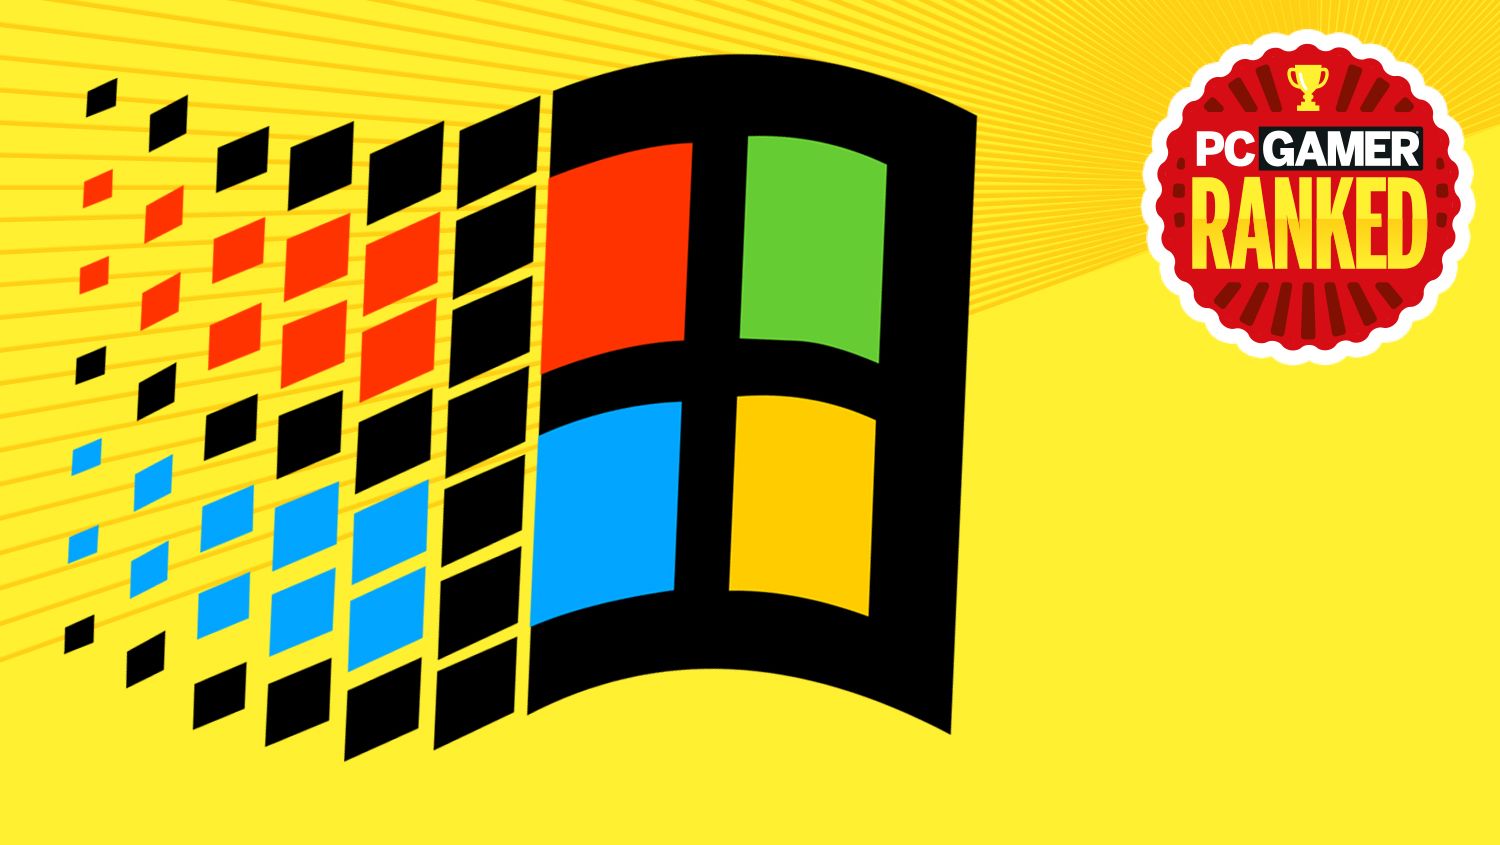 Every version of Windows, ranked from worst to best